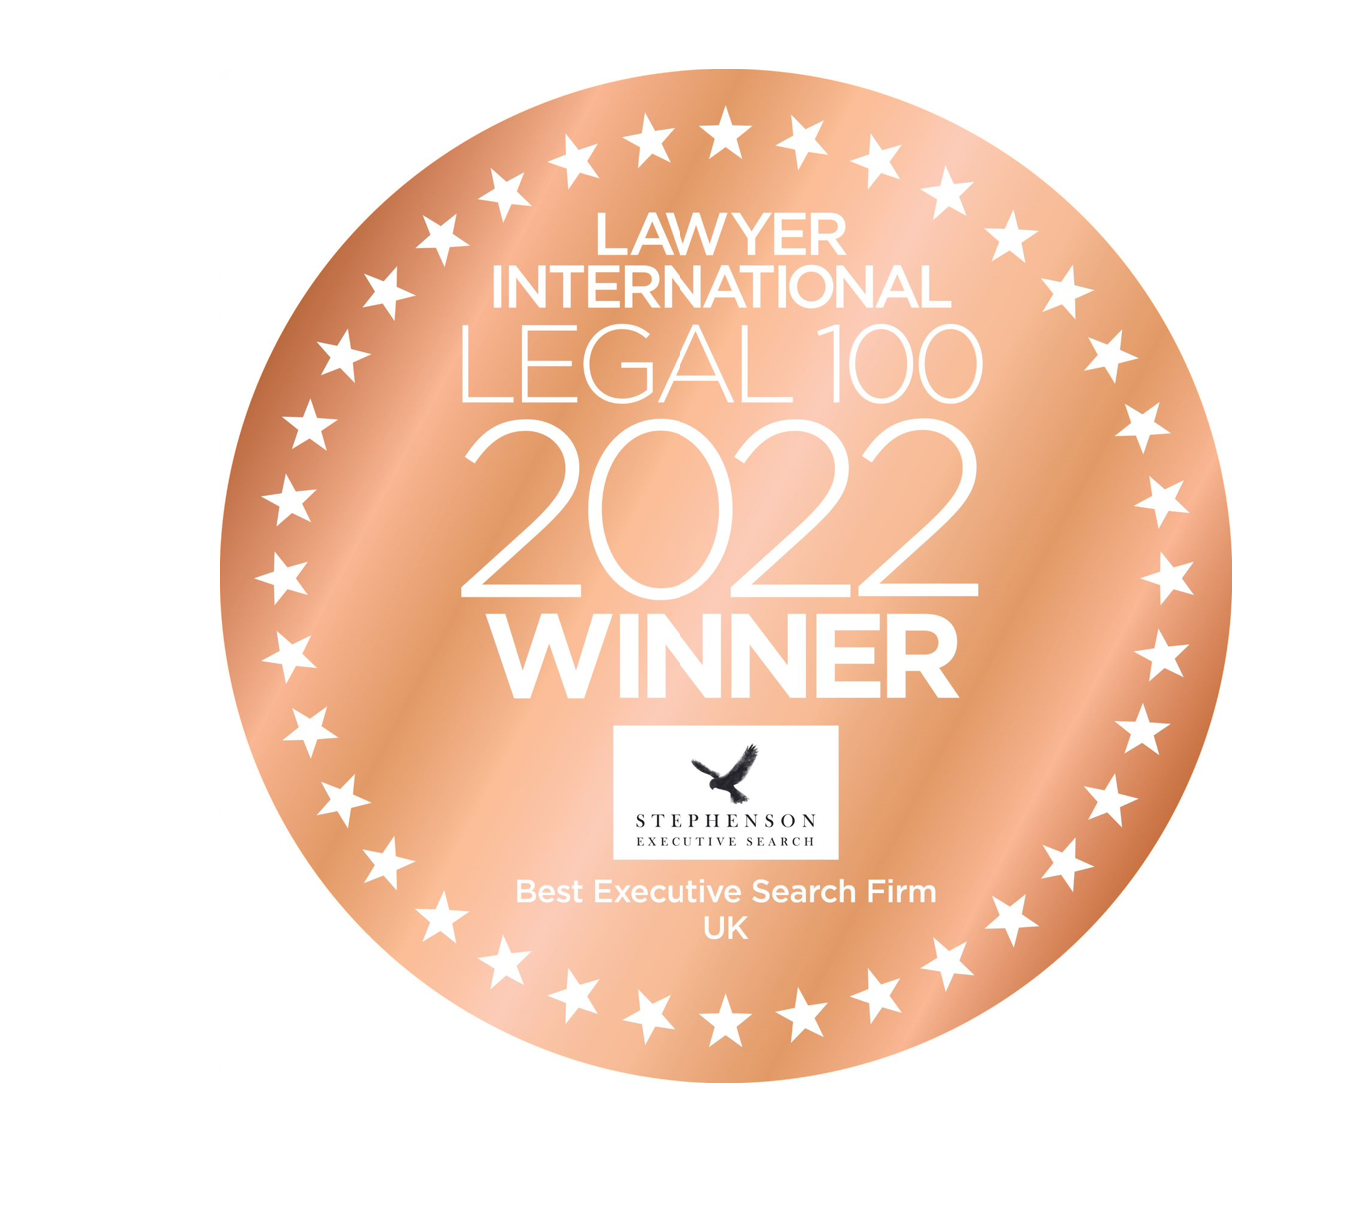 Lawyer International – “Best Legal Headhunting Firm of the Year UK” 2022